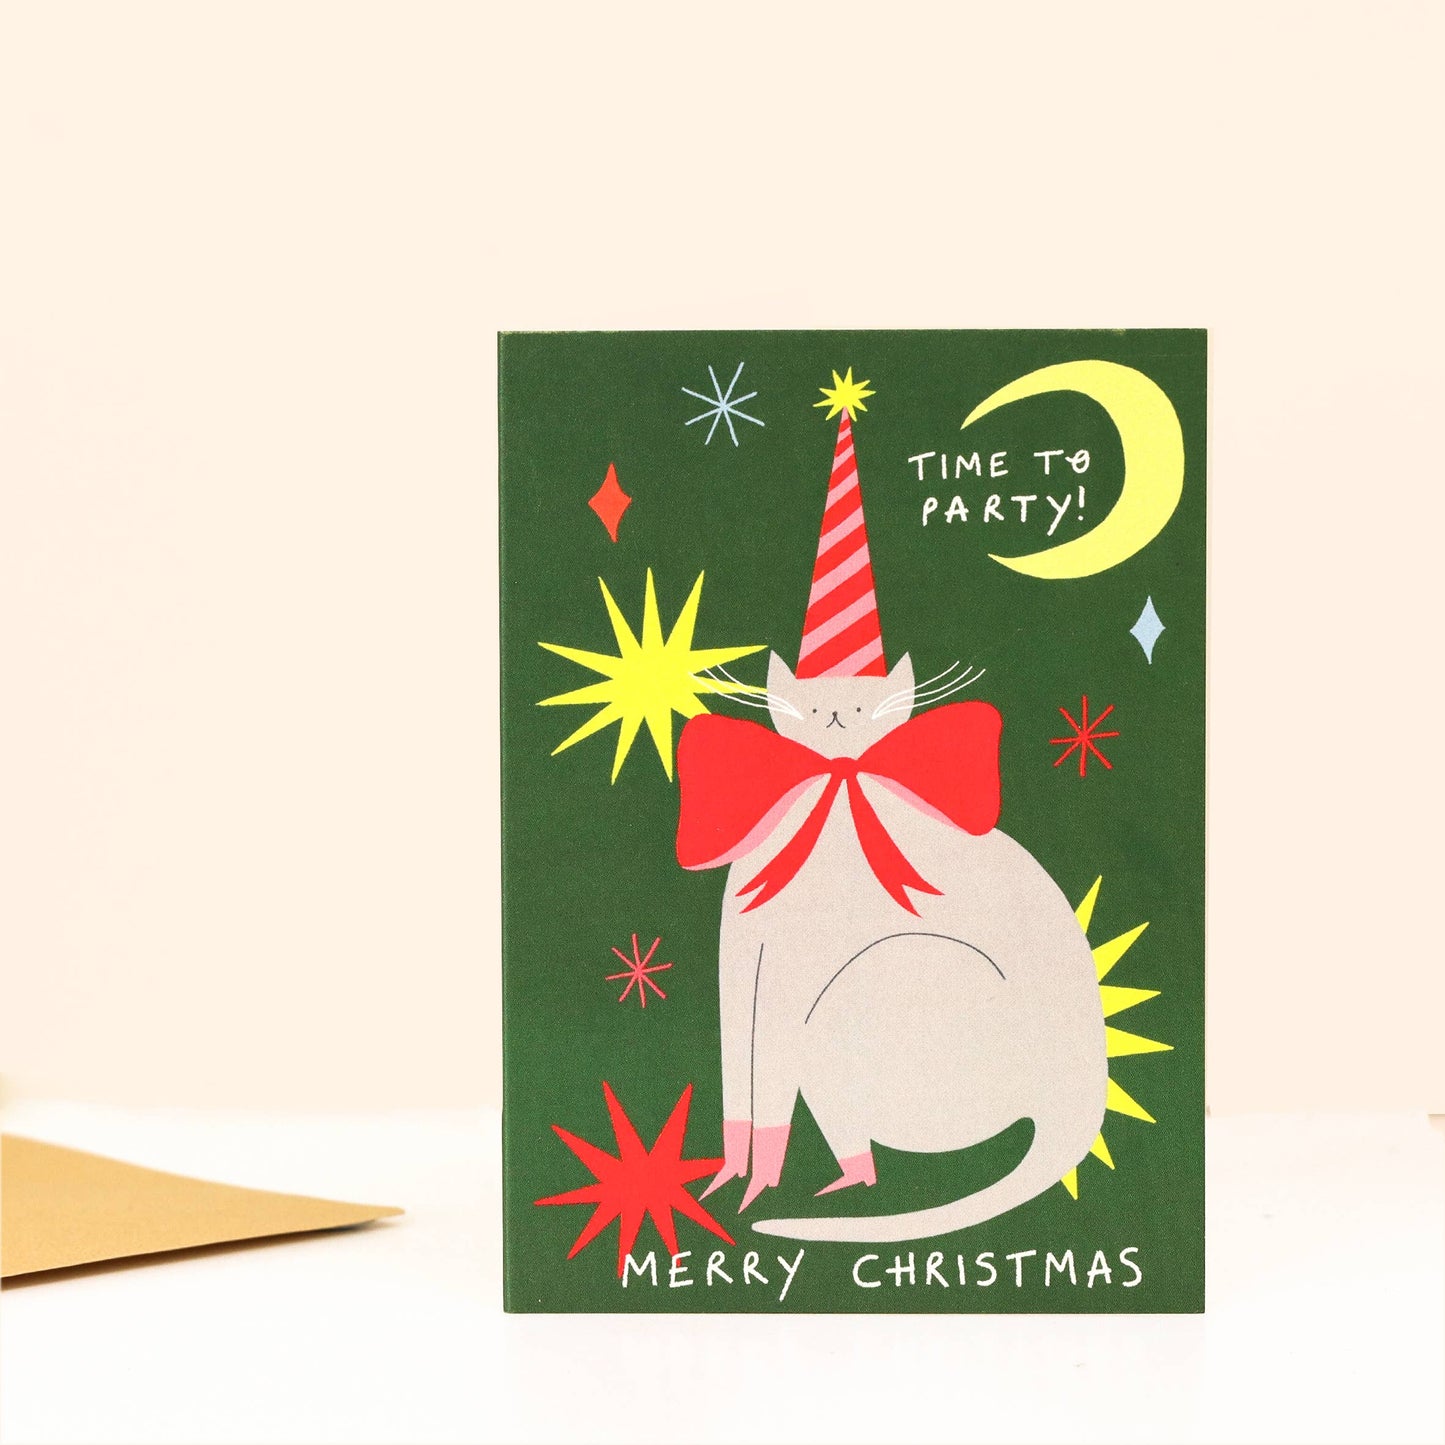 Little Black Cat Illustrated Goods - Time To Party Christmas Card | Cat Card | Party Hat | Moon